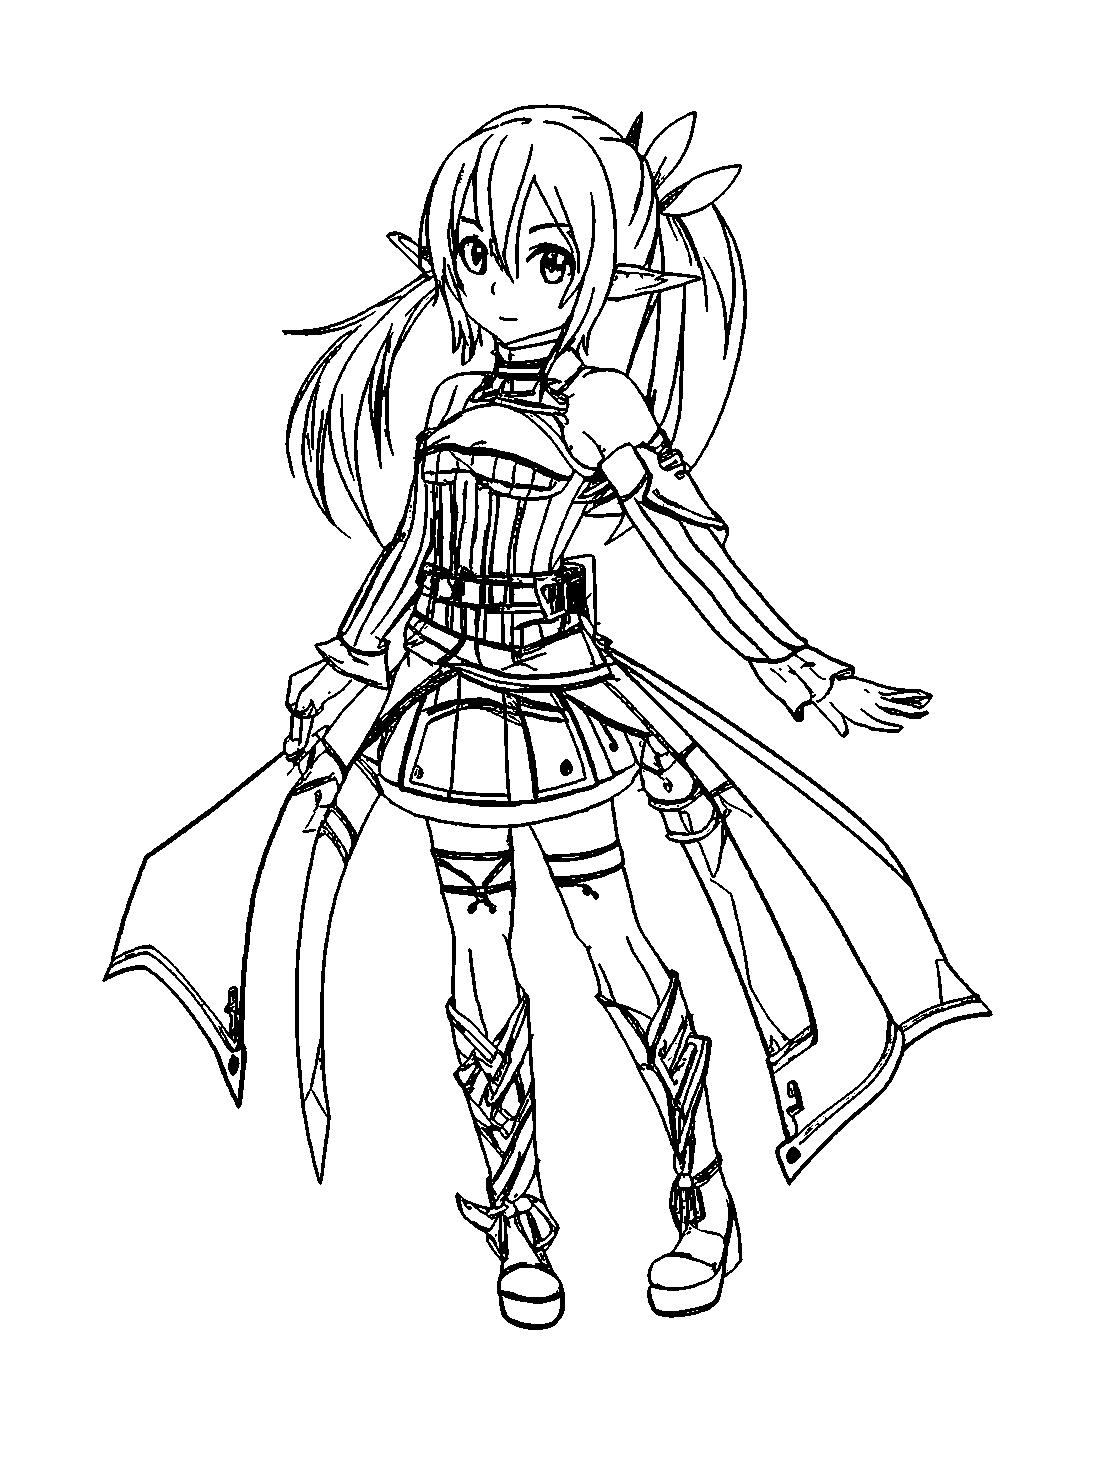 Coloring online free on x sword art online coloring pages free you can color online coloring sheets coloring pictures download and print for kids of all ages swordartonline httpstcoodwvxnnw httpstcojuereoo x